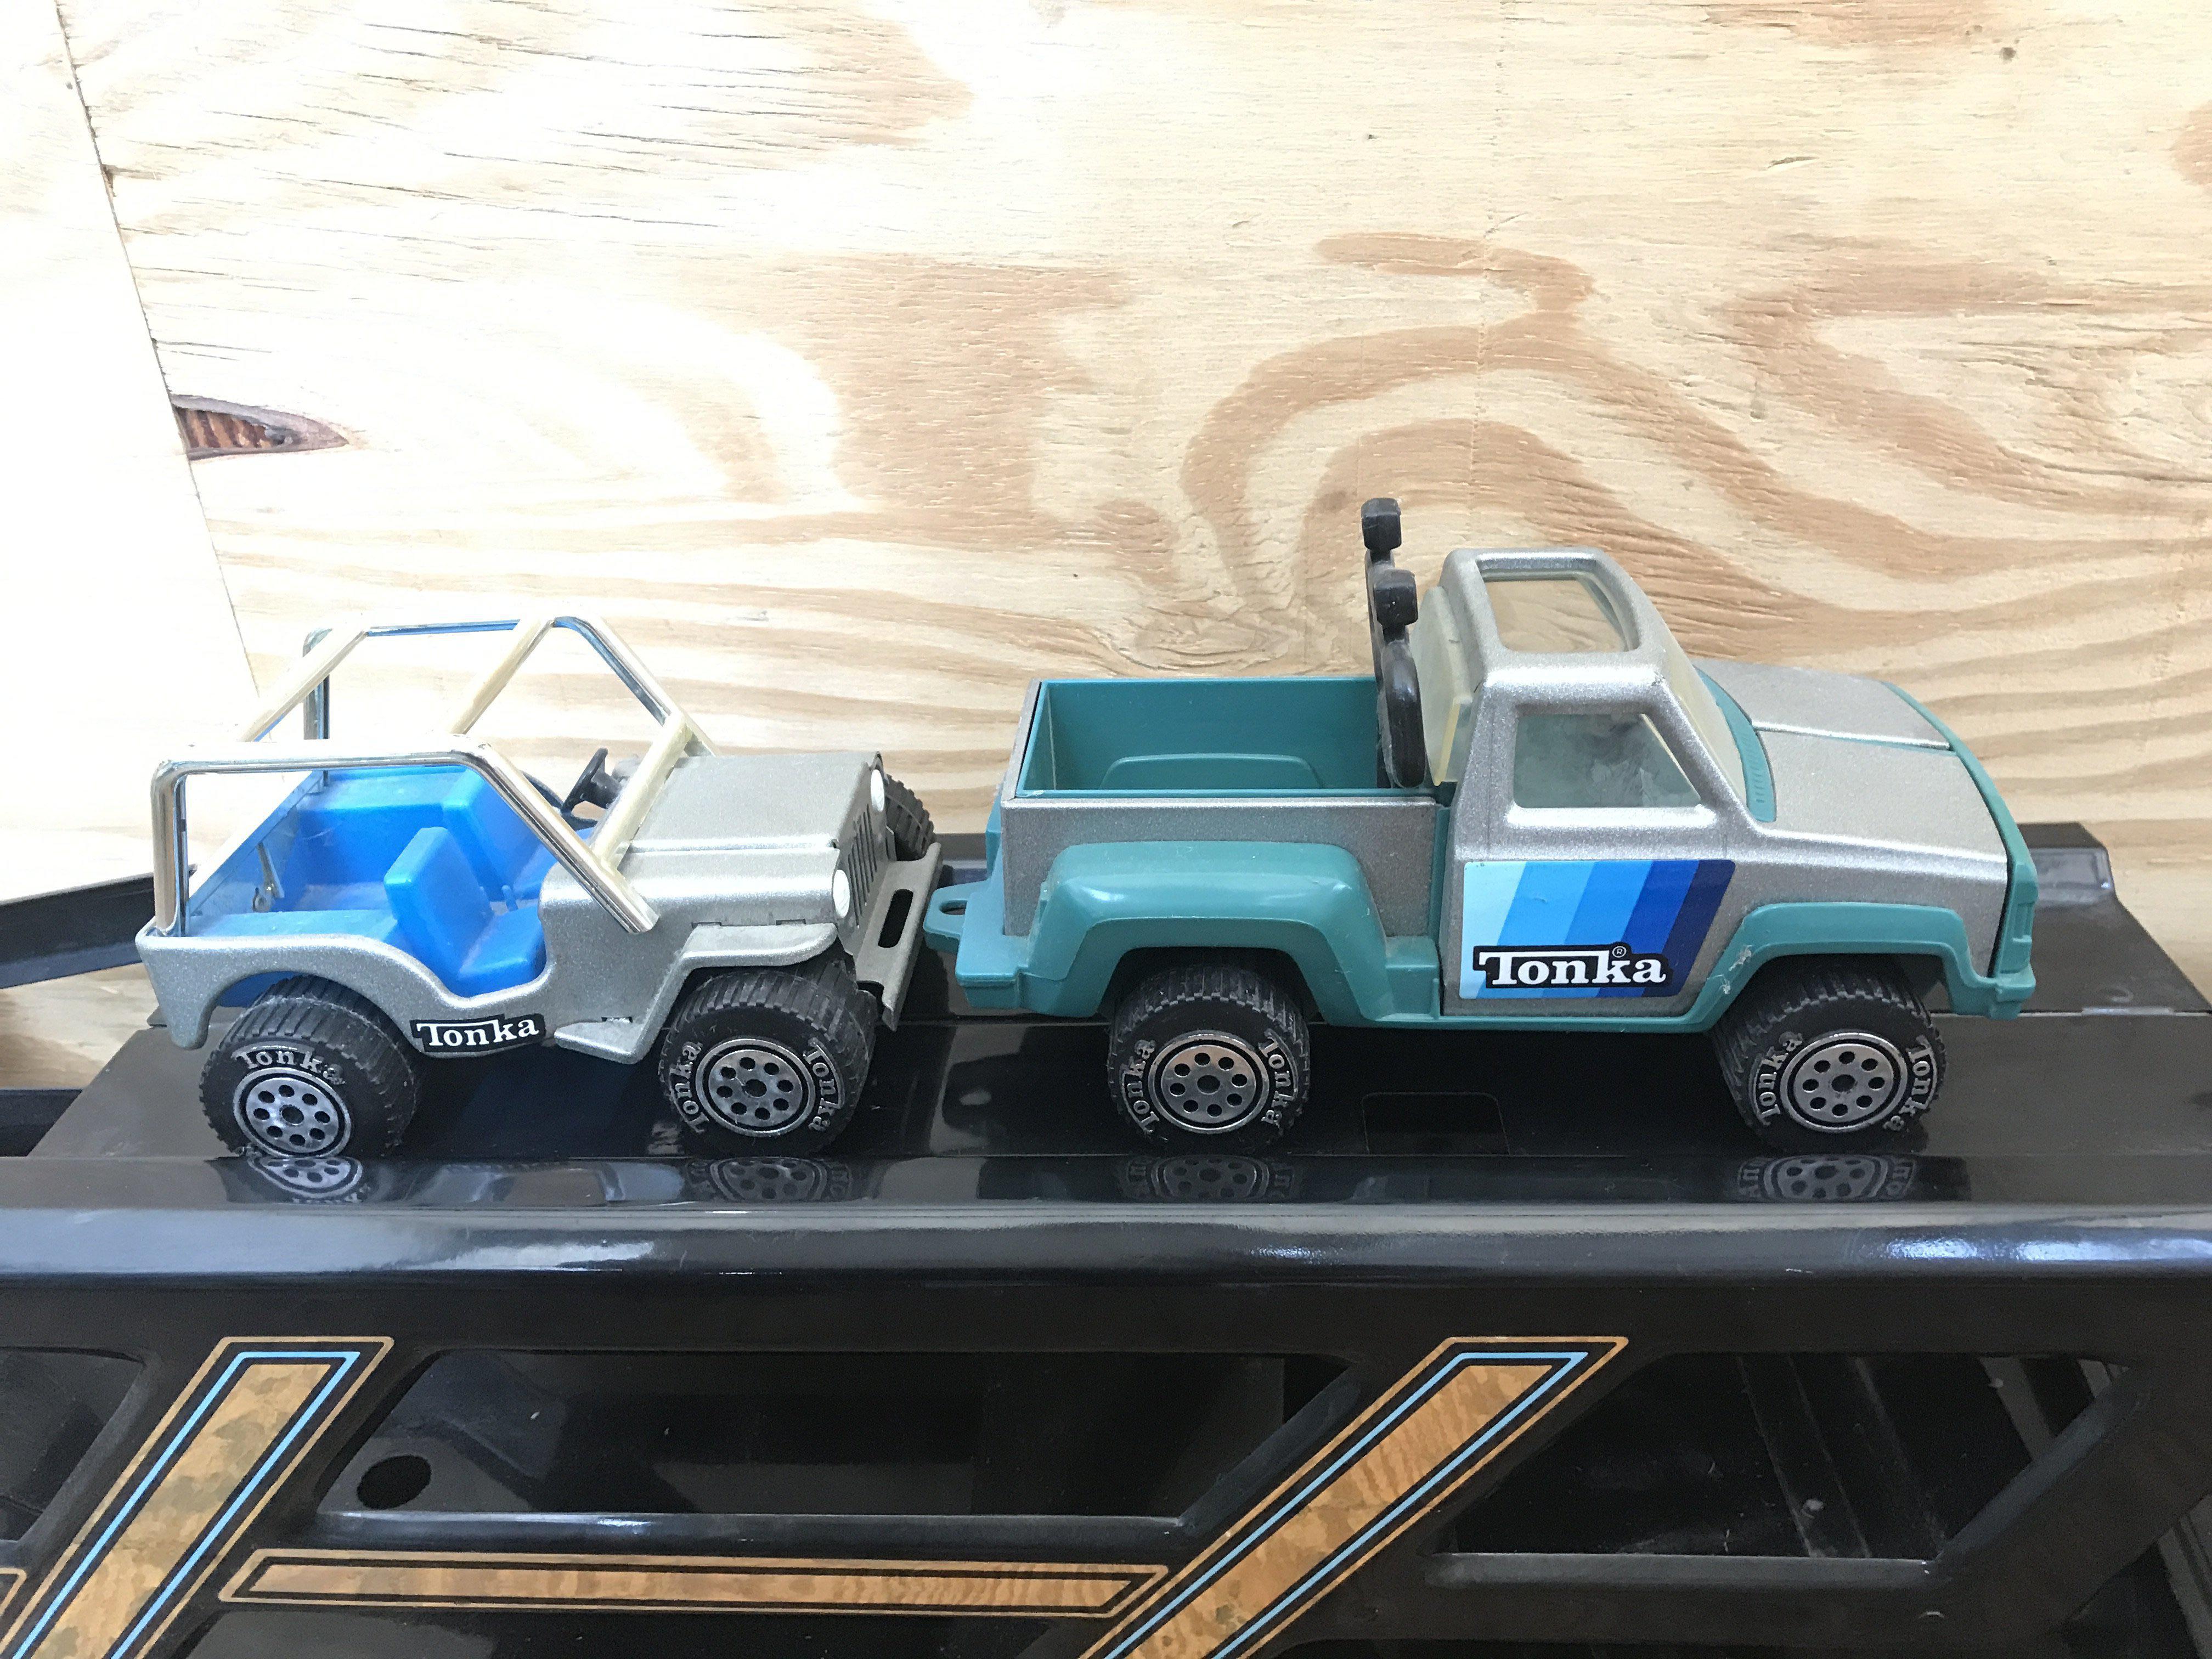 A Vintage Tonka Car Transporter with Vehicles. - Image 2 of 3